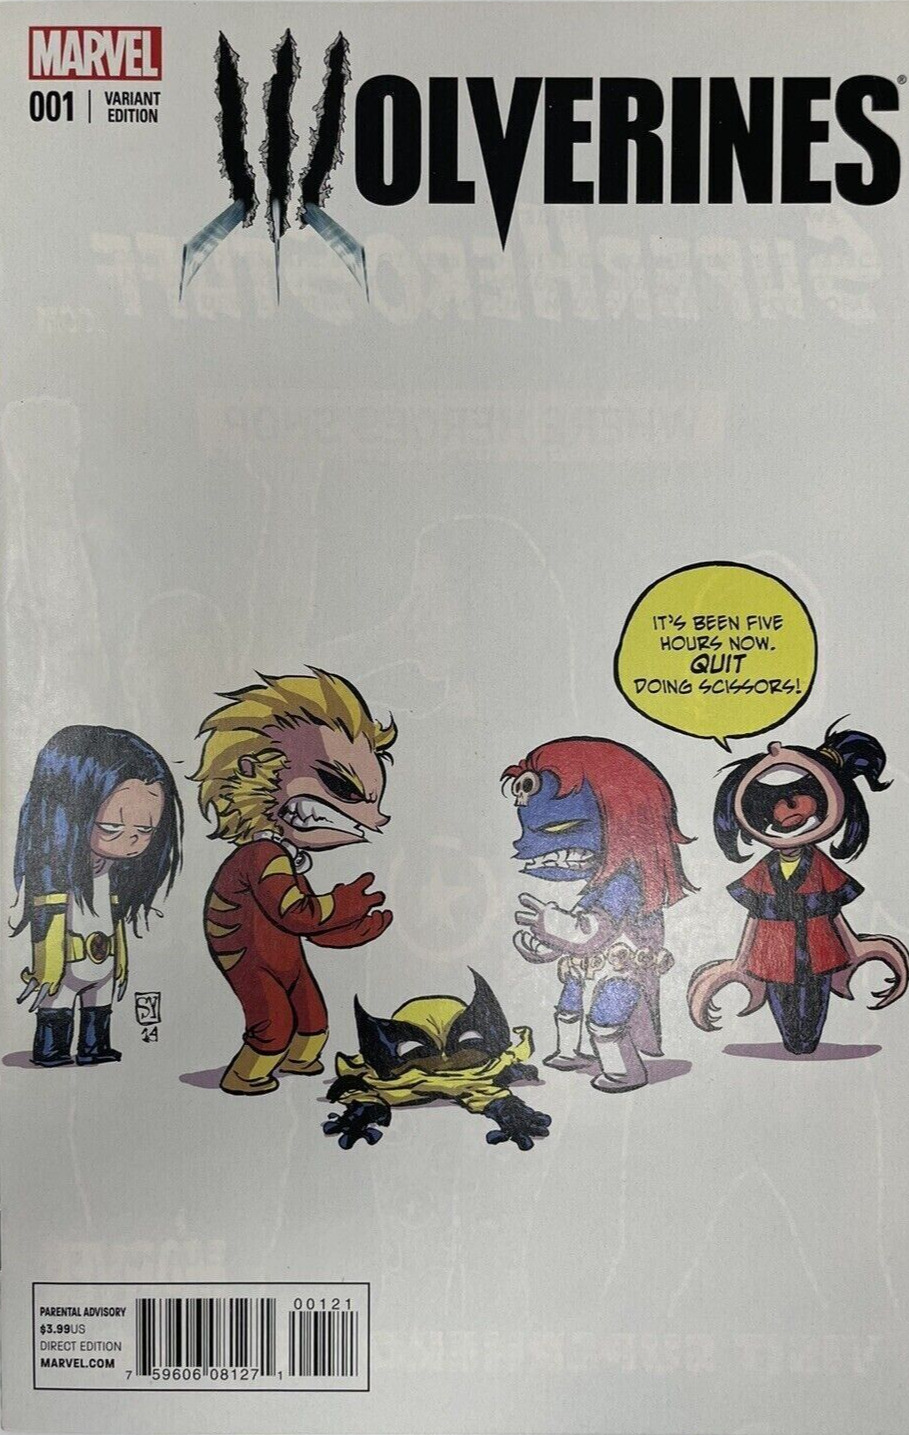 WOLVERINES #1 Skottie Young Variant Cover Marvel Comics January 2015